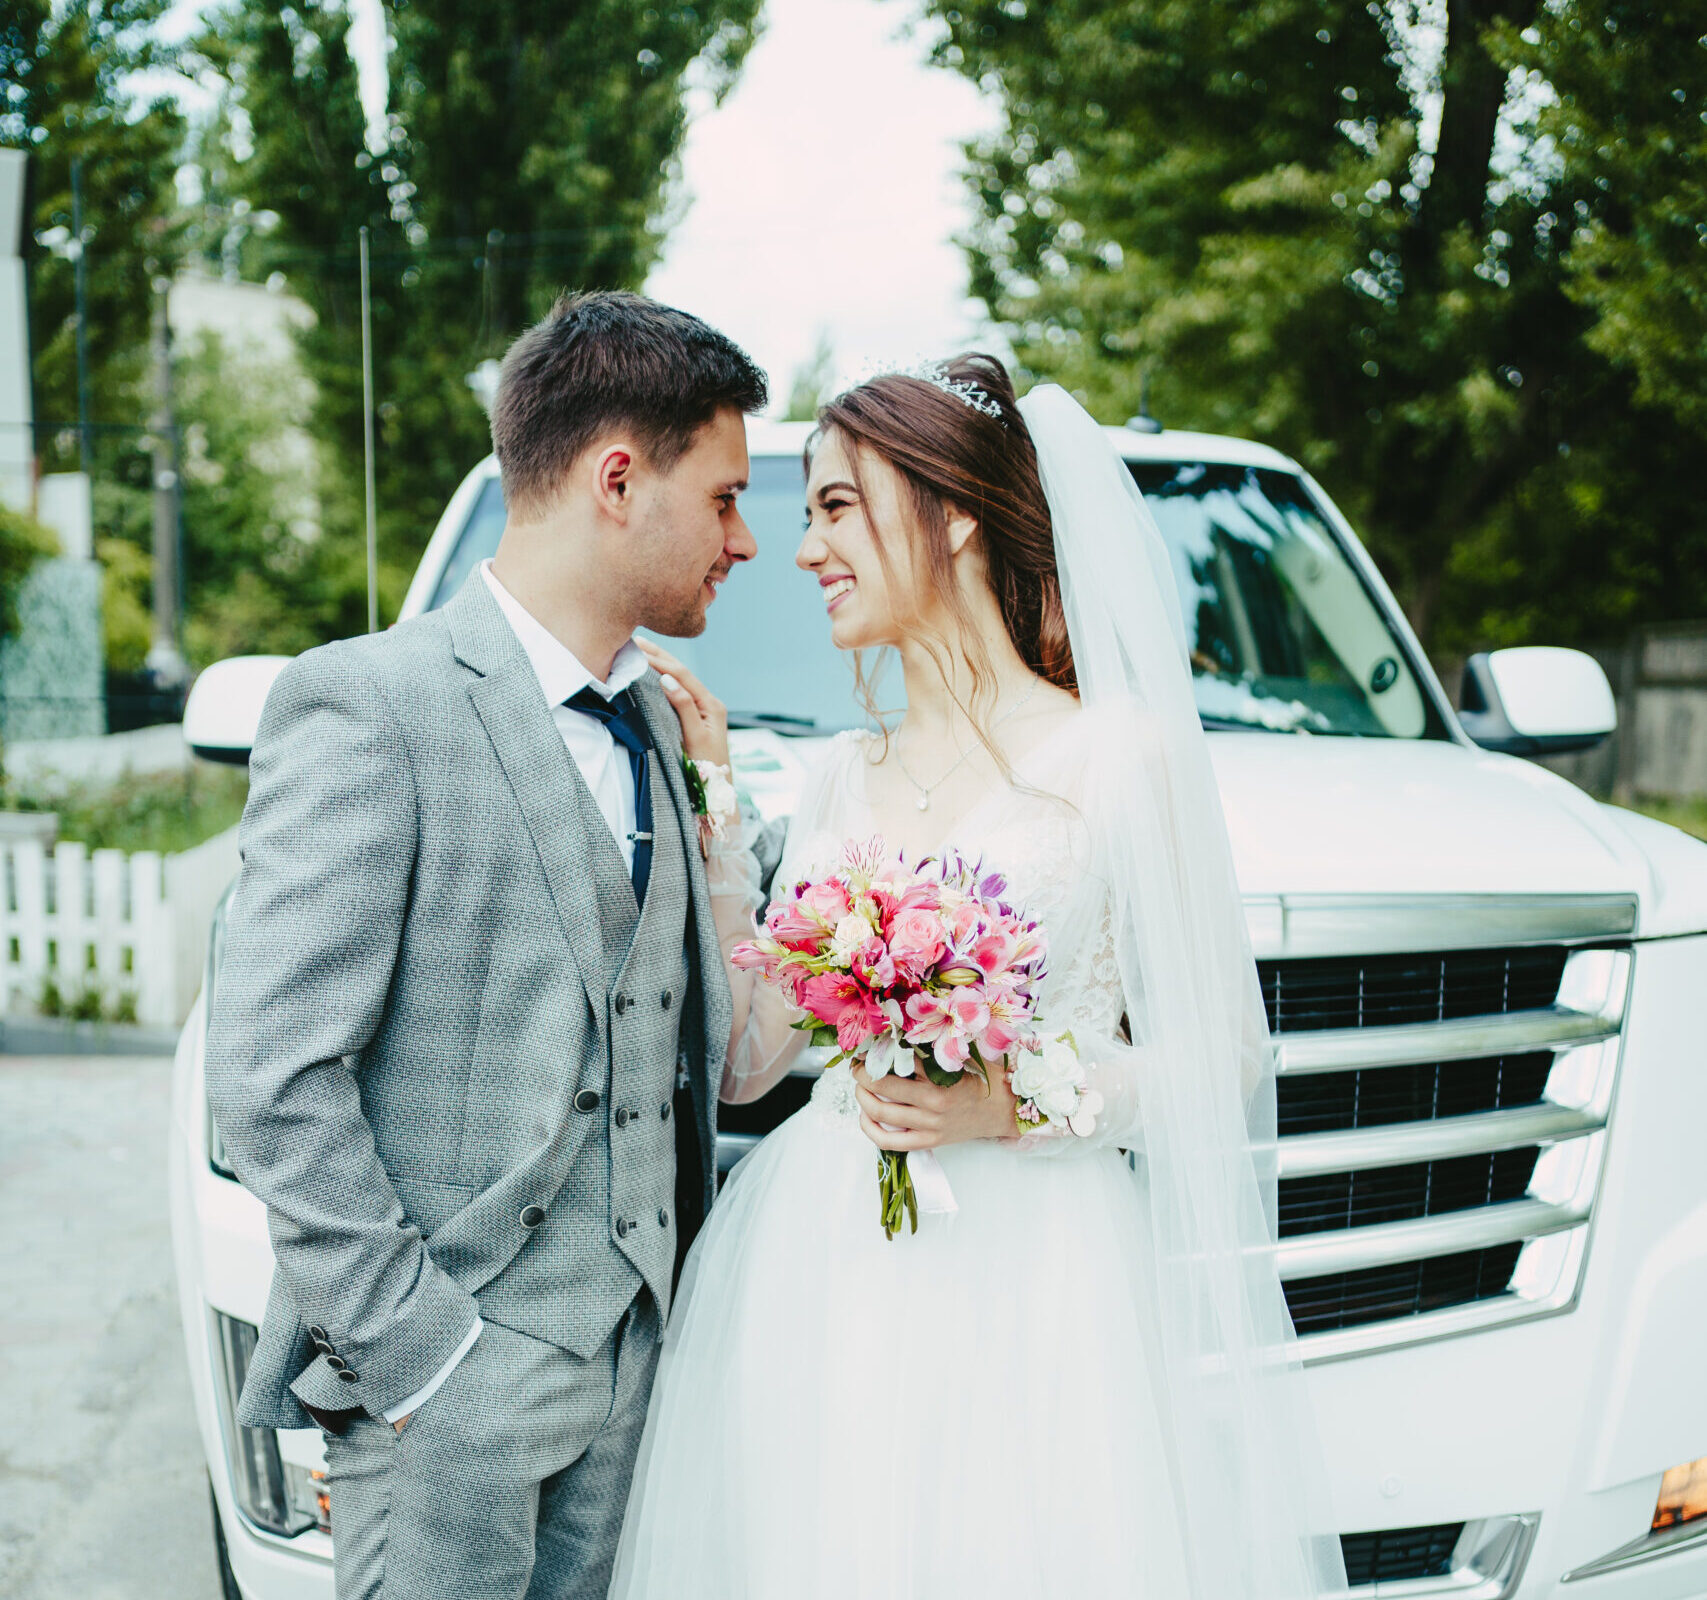 The bride and groom in front of the limousine